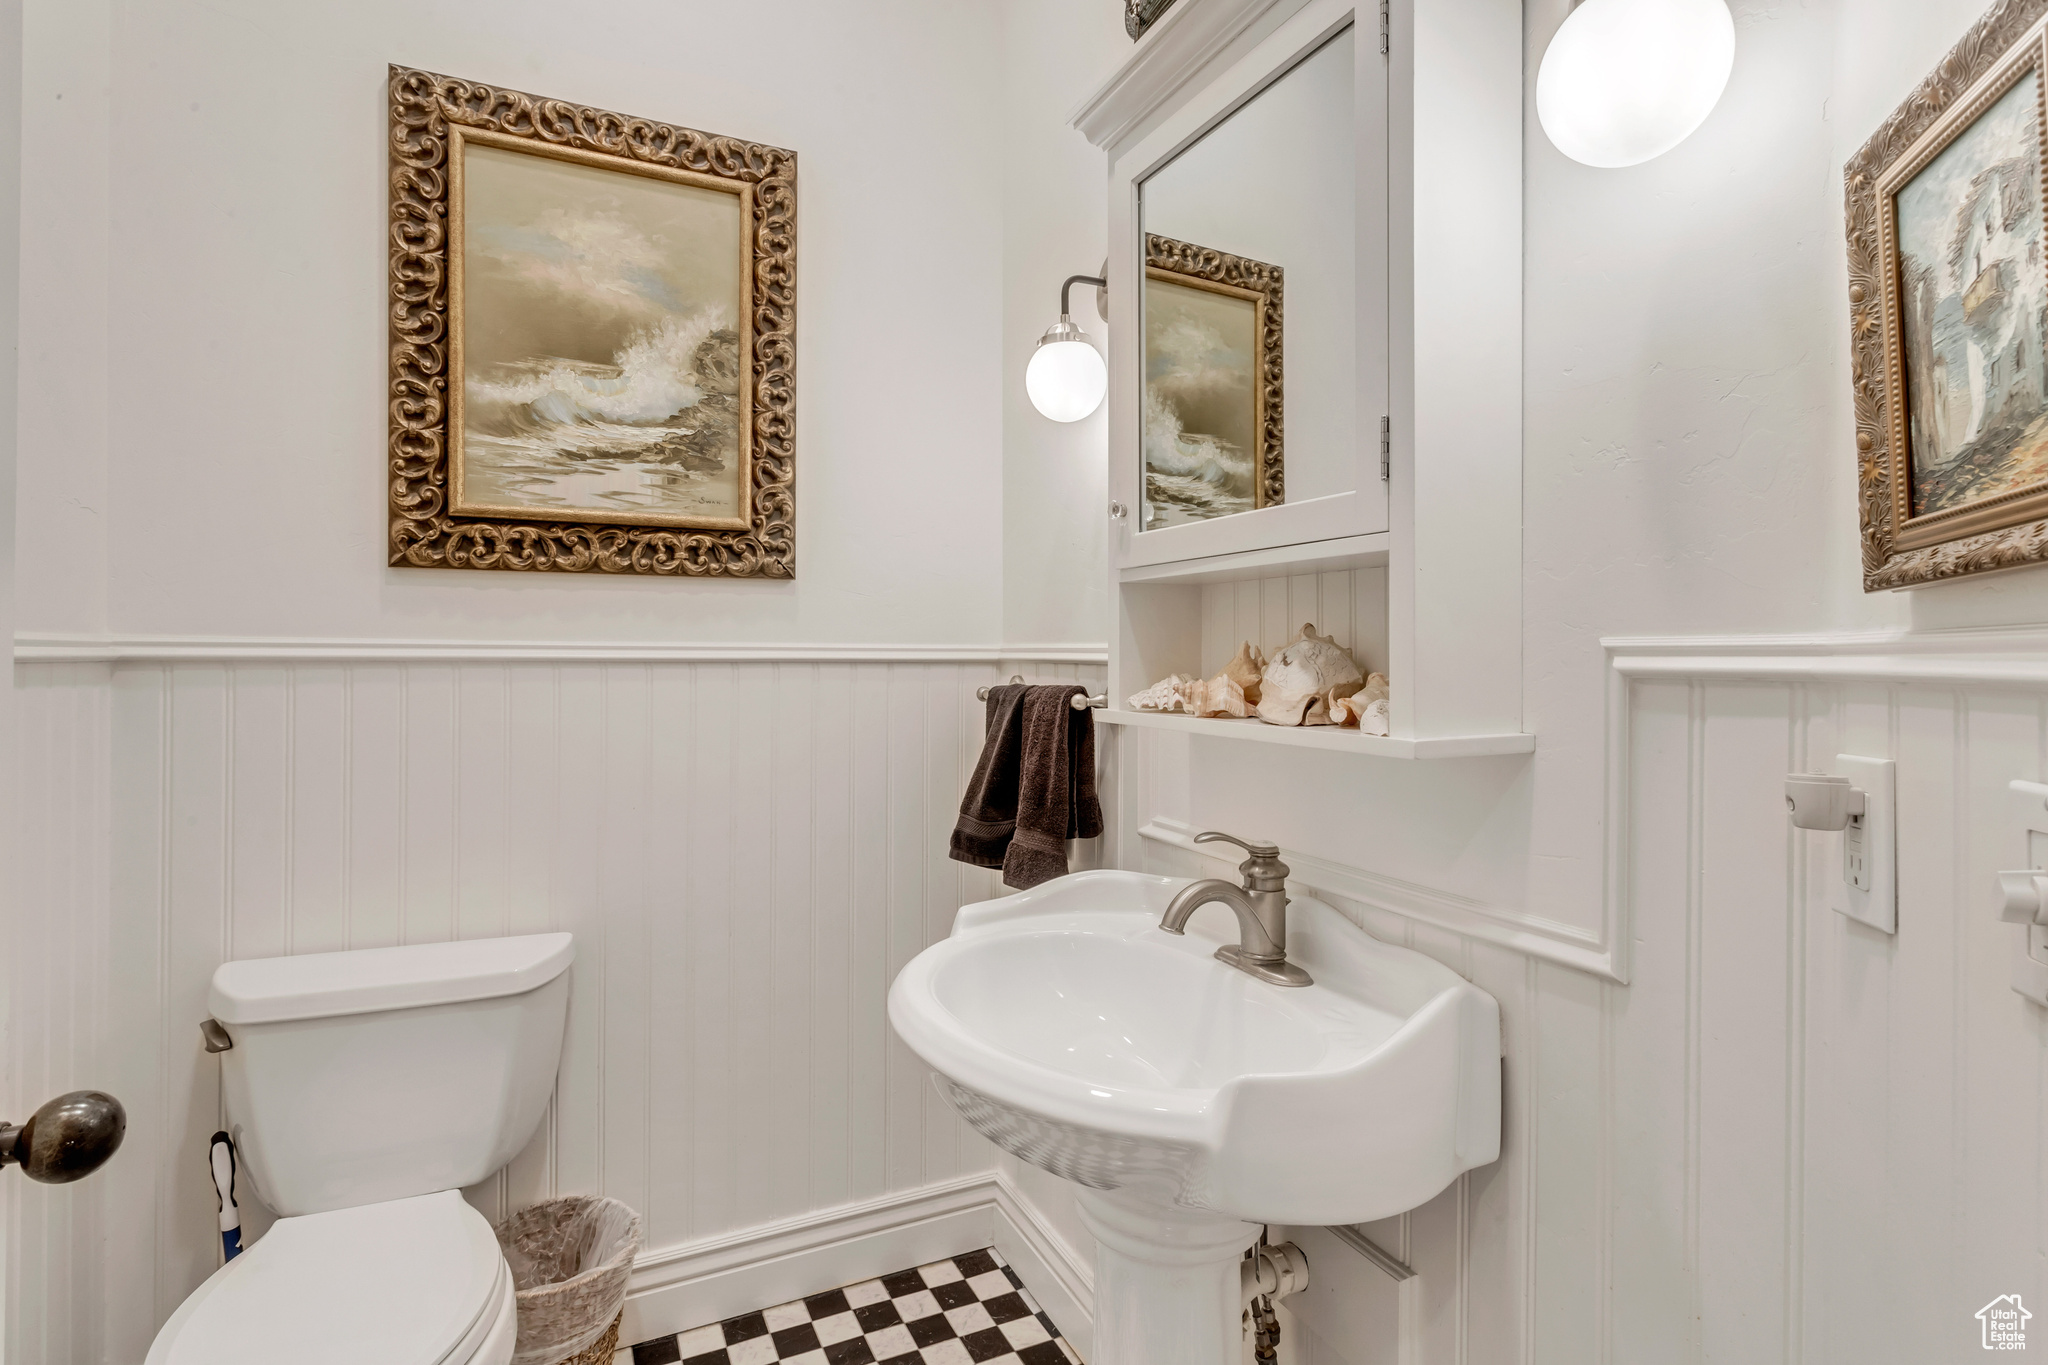 Bathroom featuring marble floors and toilet